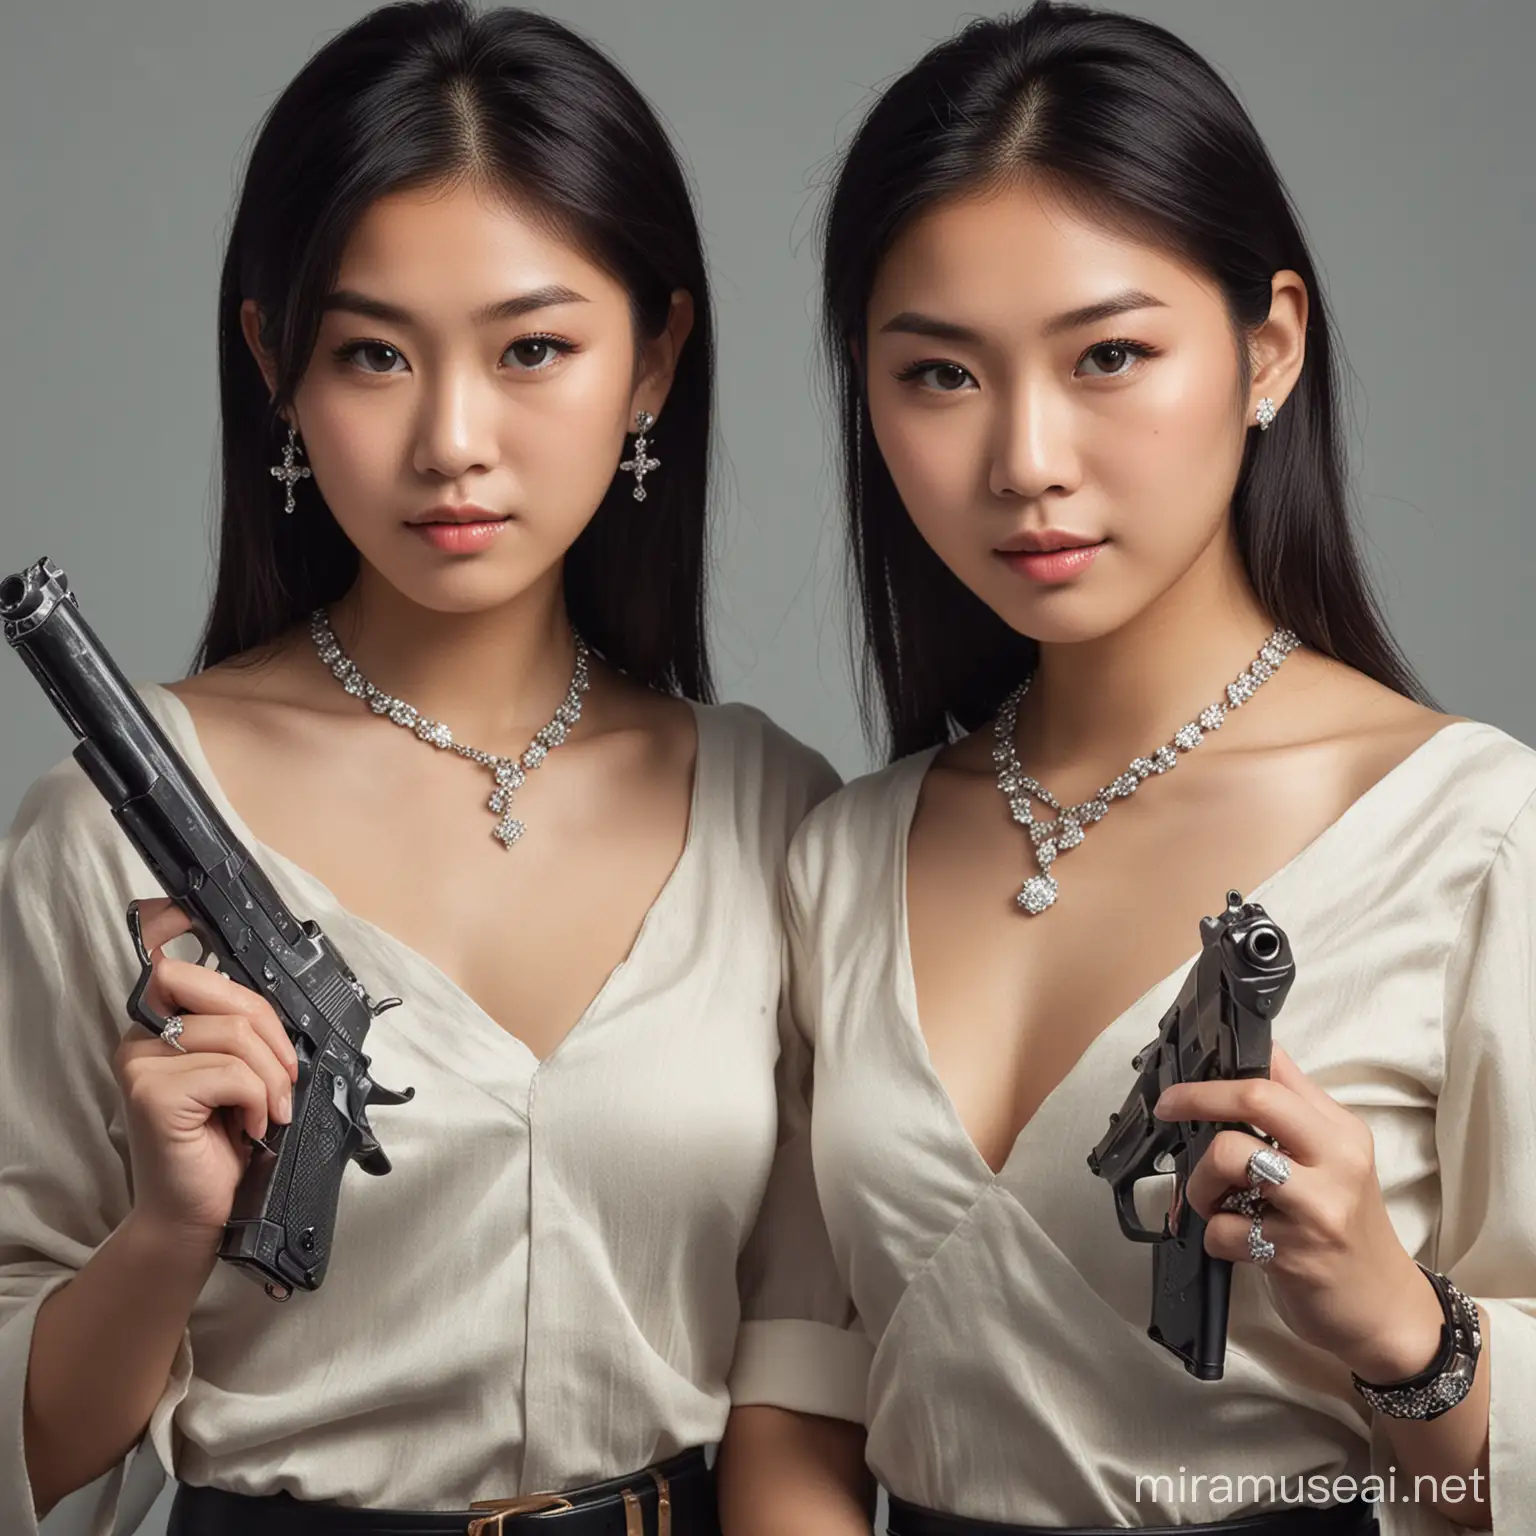 Two Asian girls with diamond necklaces on holding guns